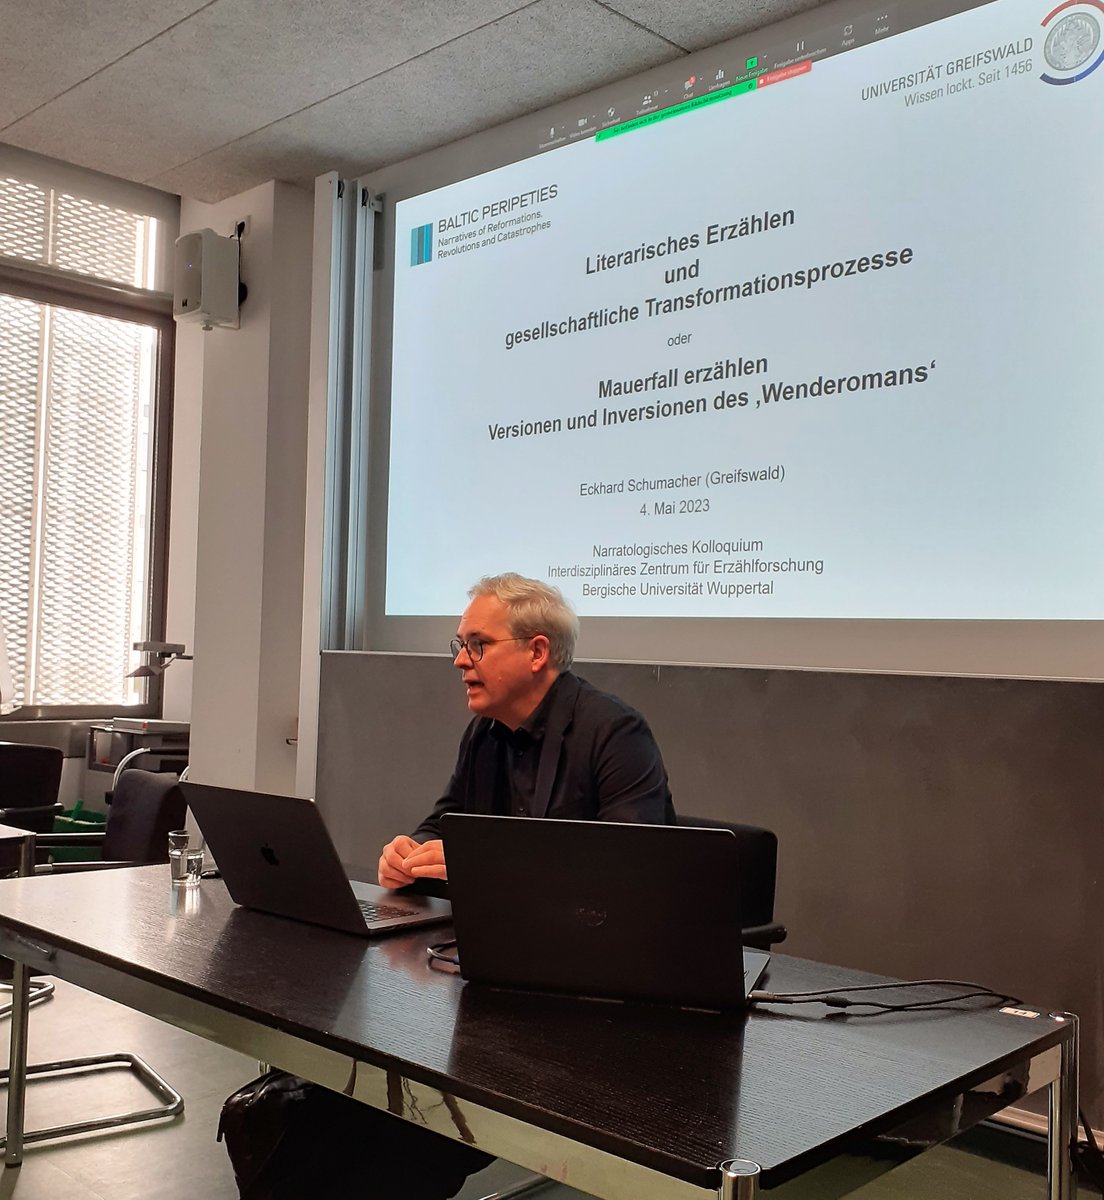 Thank you so much, #EckhardSchumacher, for your fascinating take on literature and transformation in our #NarratologicalColloquium last night and to all the participants in Wuppertal and online for the lively discussion! I hope you'll join us again in three weeks!